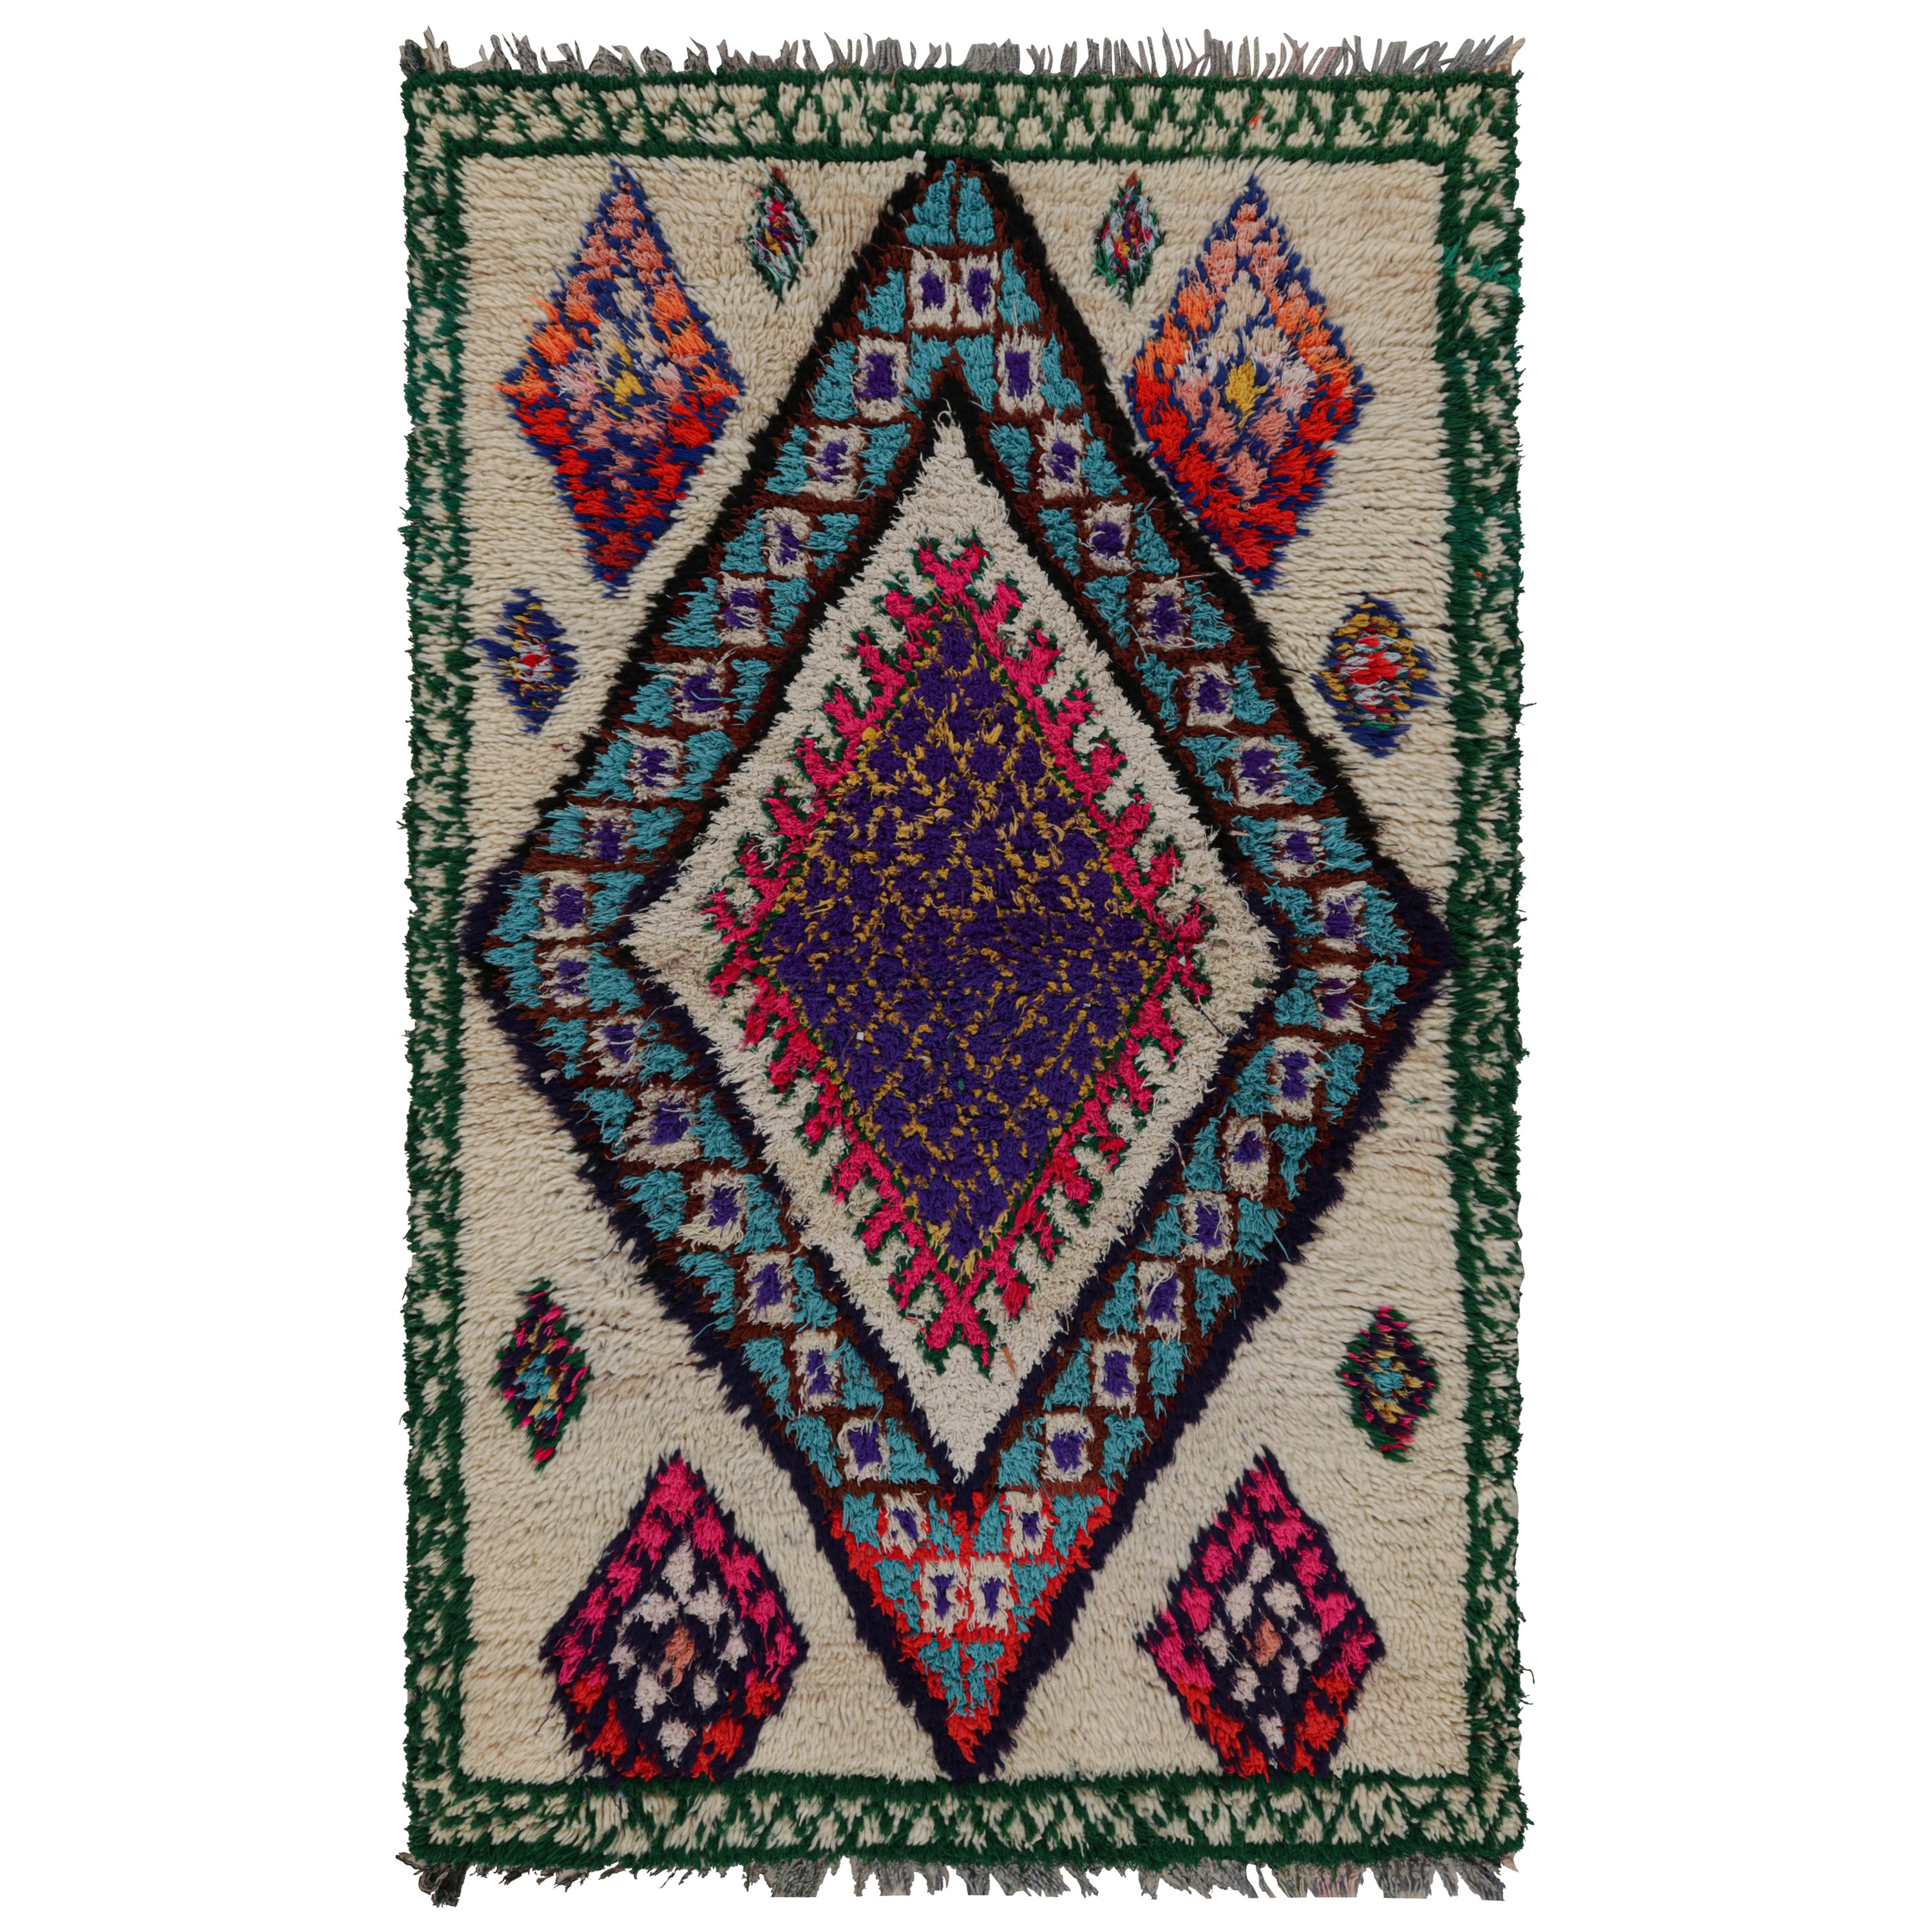 Vintage Azilal Moroccan Style Runner Rug, with Medallions from Rug & Kilim